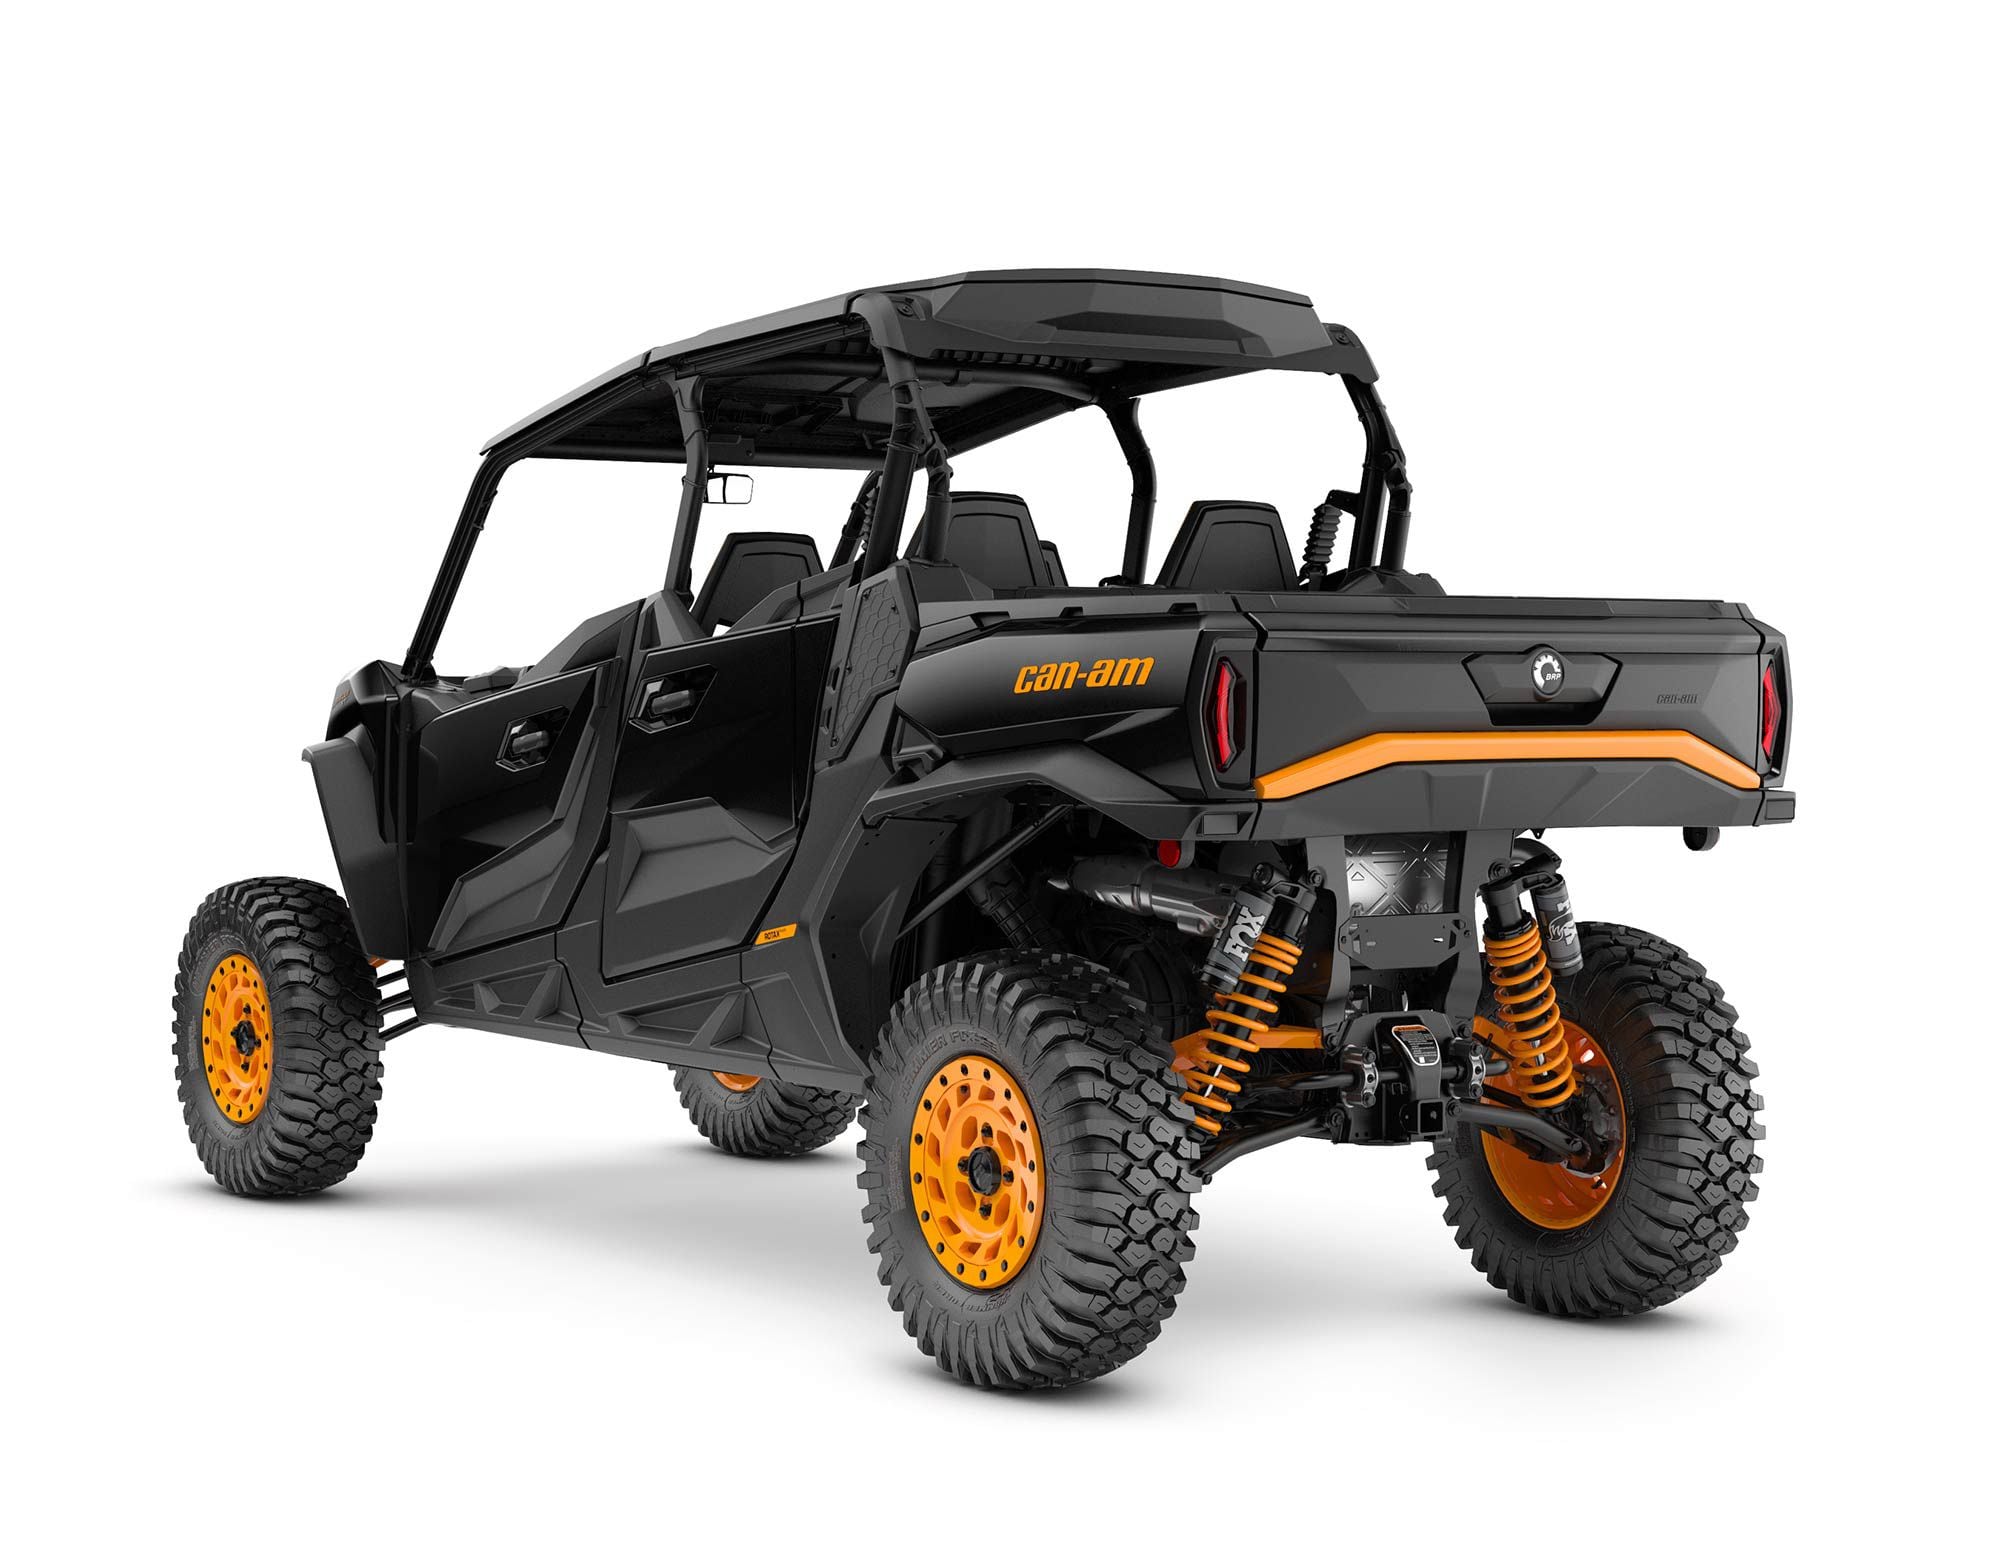 The Commander Max XT-P is rated to tow 2,000 pounds via a 2-inch hitch receiver out back, and the bed is rated for a 600-pound payload. The XT-P might skew toward trail-focused, but it can still pull work duty with no trouble.